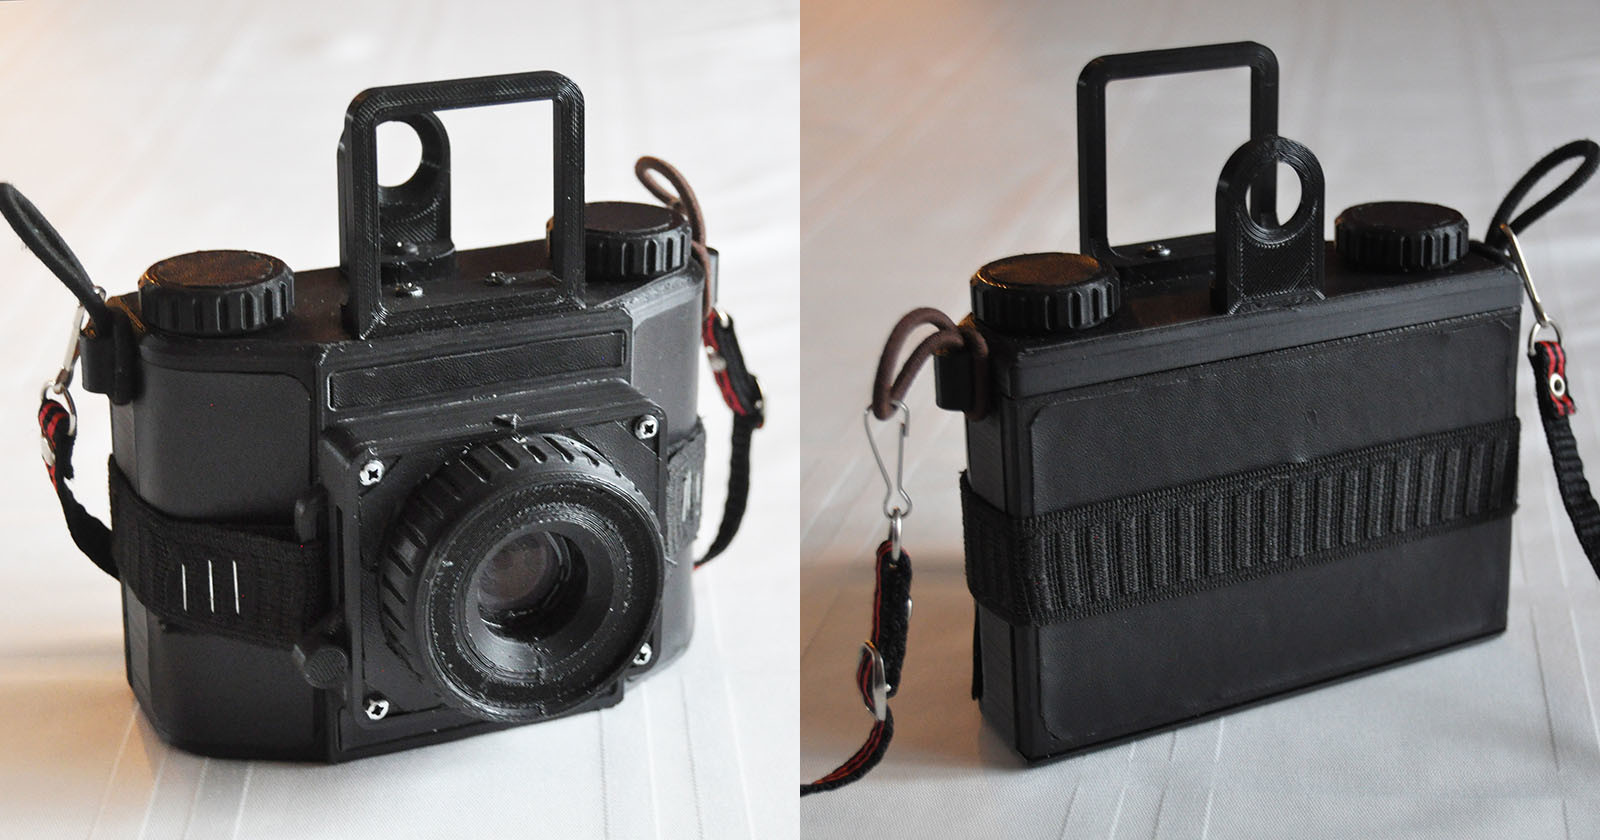 Photographer Designs and 3D-Prints an Entire Camera, Including the Shutter